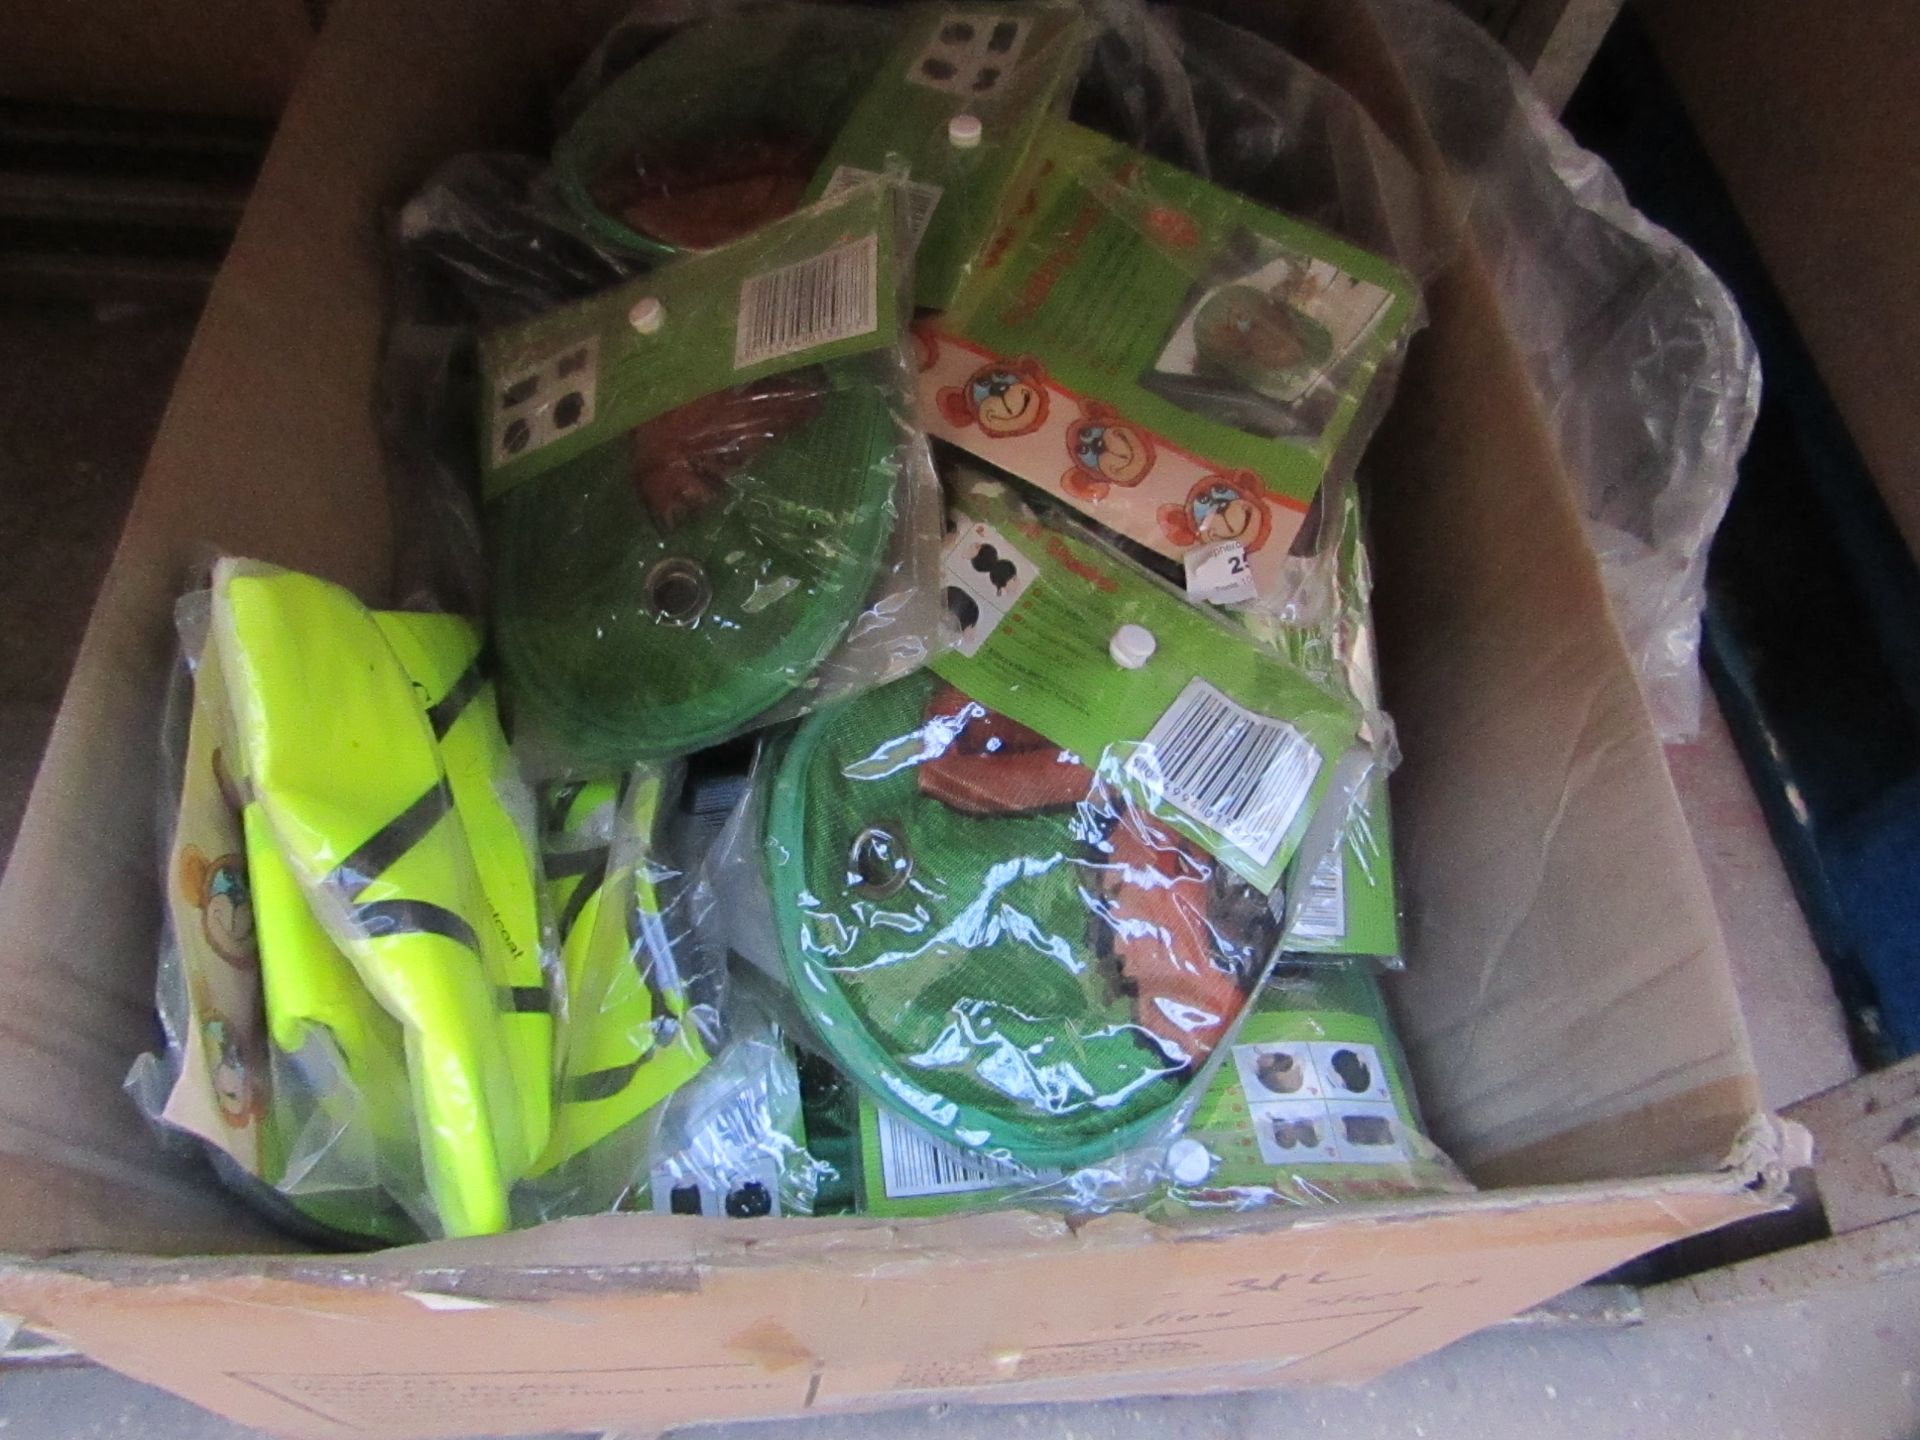 Box of approx 20 Mixed items which includes sun shades & Hi Viz vests - Assorted Sizes.